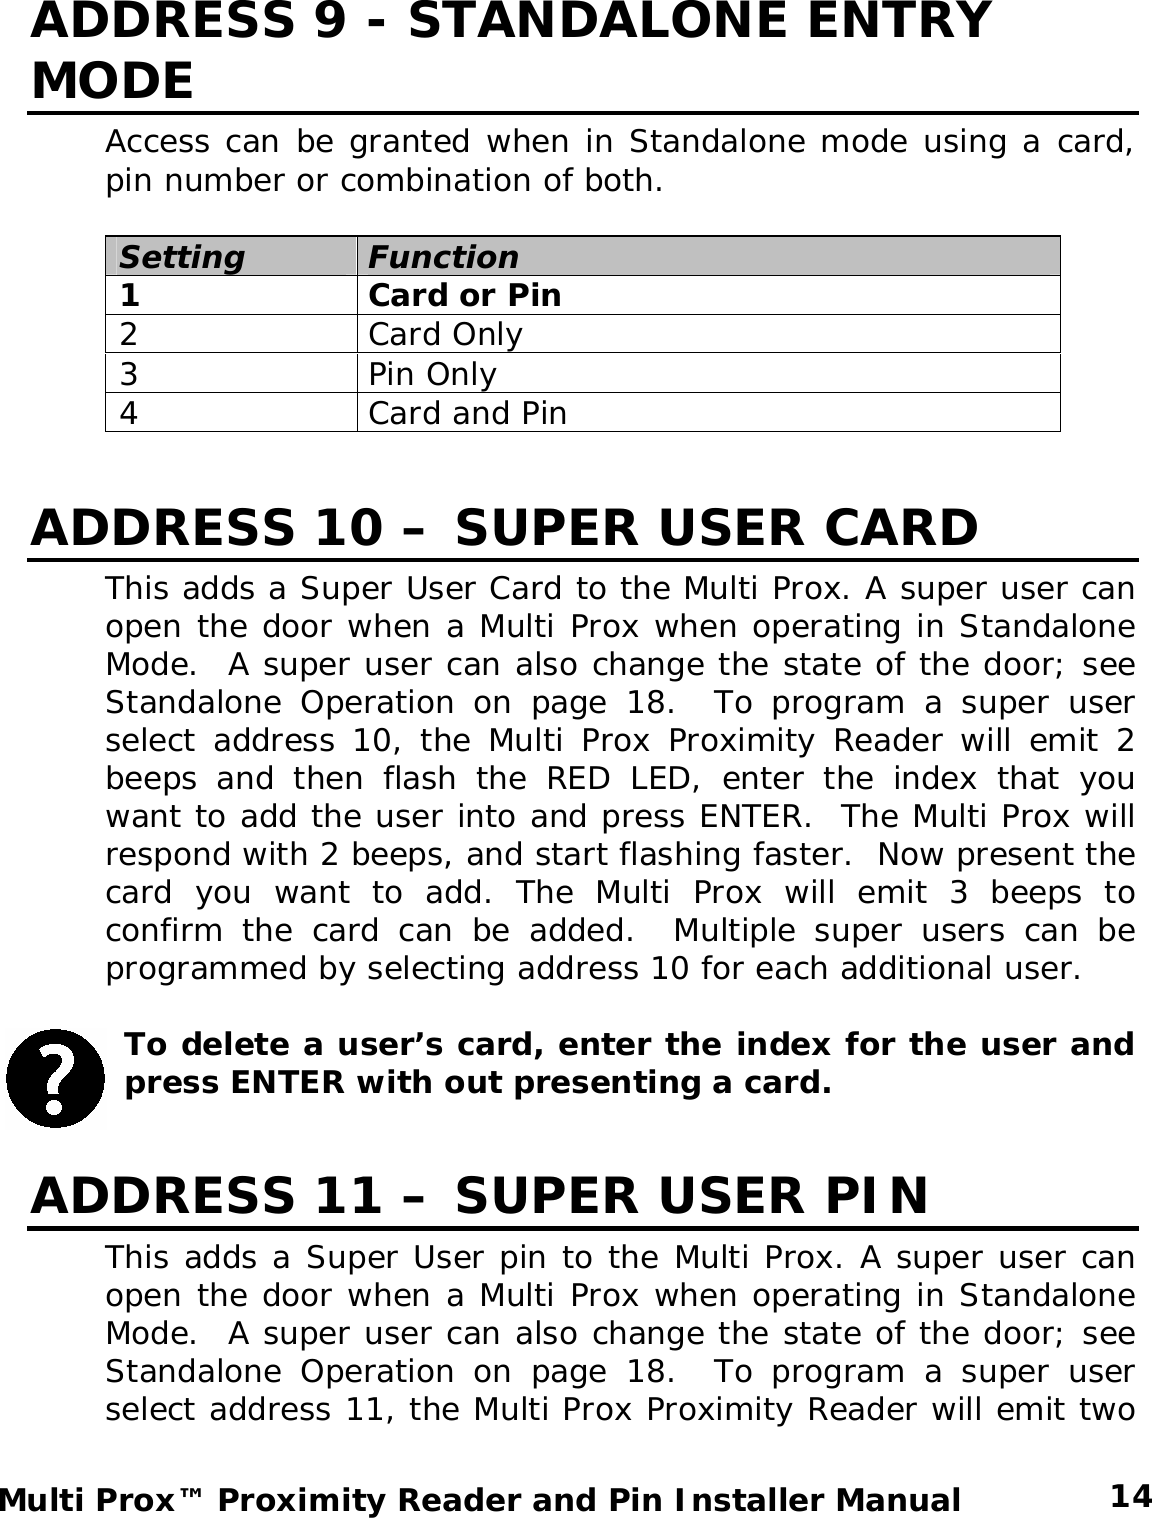 ADDRESS 9 - STANDALONE ENTRY MODE Access can be granted when in Standalone mode using a card, pin number or combination of both.  Setting Function 1  Card or Pin 2 Card Only 3 Pin Only 4  Card and Pin  ADDRESS 10 – SUPER USER CARD This adds a Super User Card to the Multi Prox. A super user can open the door when a Multi Prox when operating in Standalone Mode.  A super user can also change the state of the door; see Standalone Operation on page 18.  To program a super user select address 10, the Multi Prox Proximity Reader will emit 2 beeps and then flash the RED LED, enter the index that you want to add the user into and press ENTER.  The Multi Prox will respond with 2 beeps, and start flashing faster.  Now present the card you want to add. The Multi Prox will emit 3 beeps to confirm the card can be added.  Multiple super users can be programmed by selecting address 10 for each additional user.  To delete a user’s card, enter the index for the user and press ENTER with out presenting a card.  ADDRESS 11 – SUPER USER PIN This adds a Super User pin to the Multi Prox. A super user can open the door when a Multi Prox when operating in Standalone Mode.  A super user can also change the state of the door; see Standalone Operation on page 18.  To program a super user select address 11, the Multi Prox Proximity Reader will emit two  14 Multi Prox™ Proximity Reader and Pin Installer Manual 